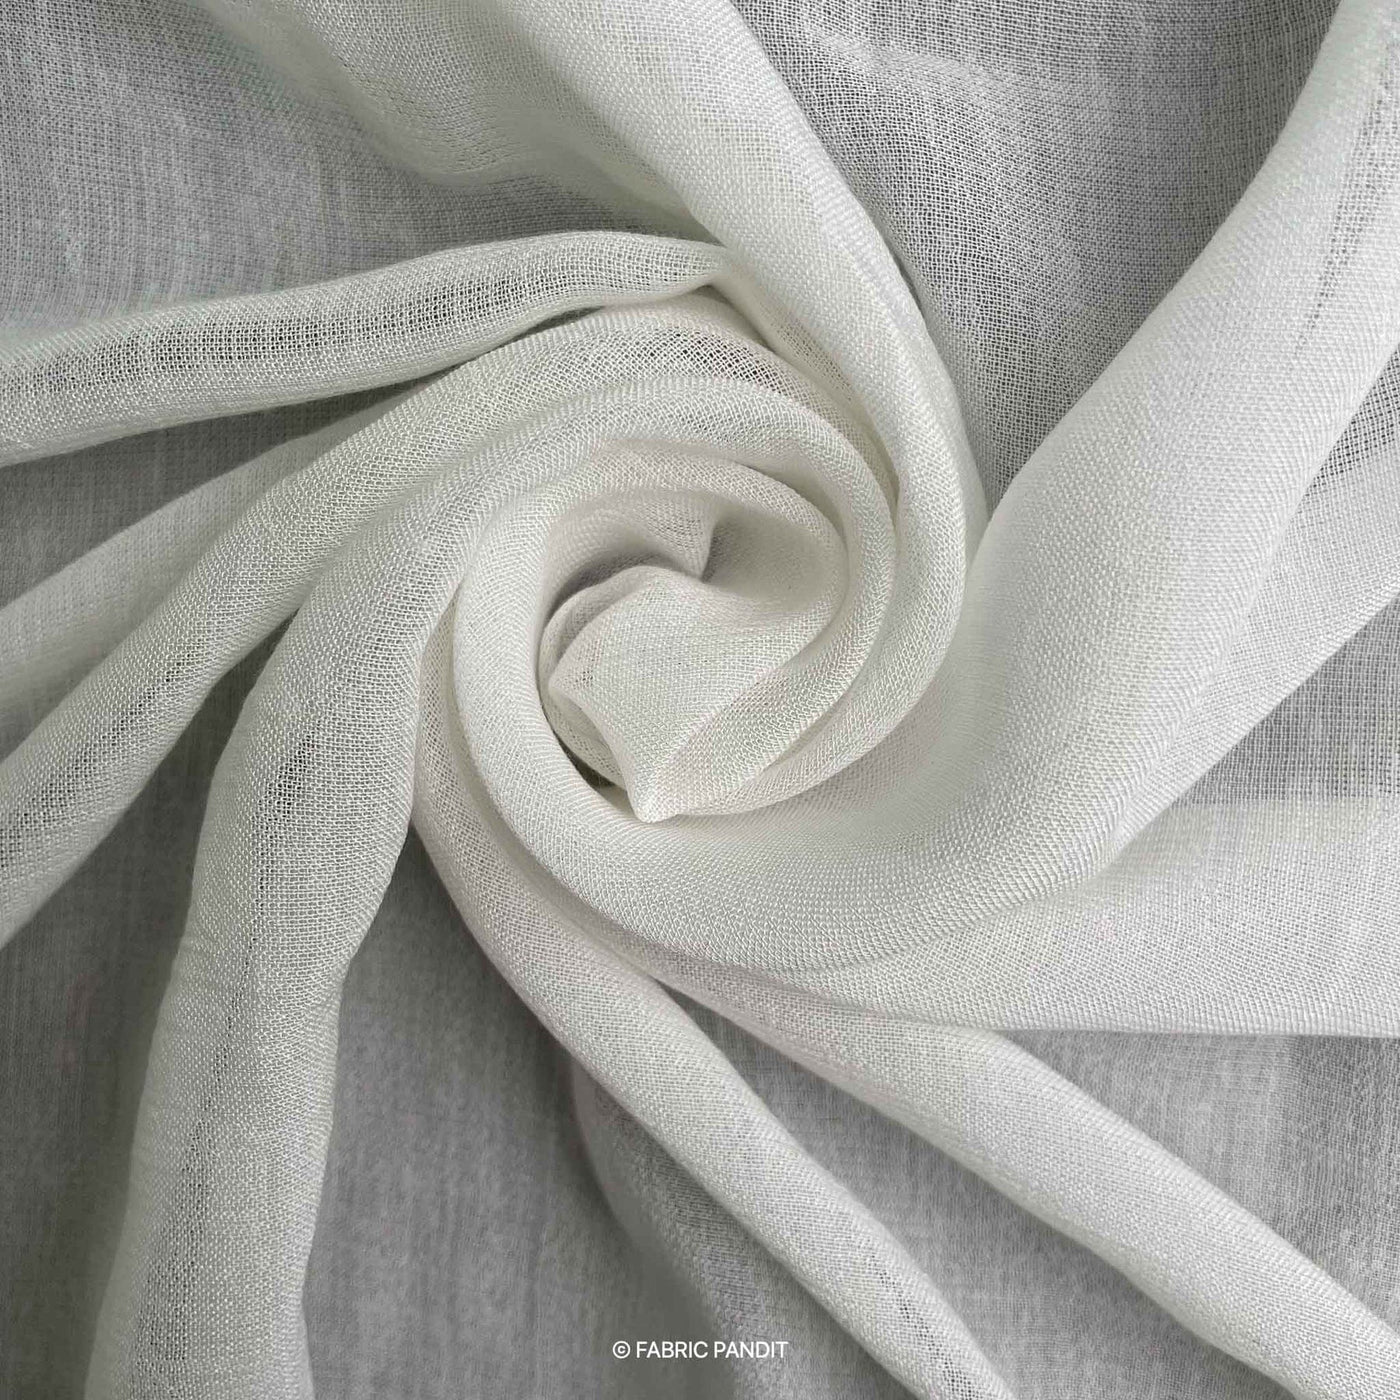 Fabric Pandit Fabric White Dyeable Pure Modal Georgette Plain Fabric (Width 44 inches, 87 Gms)